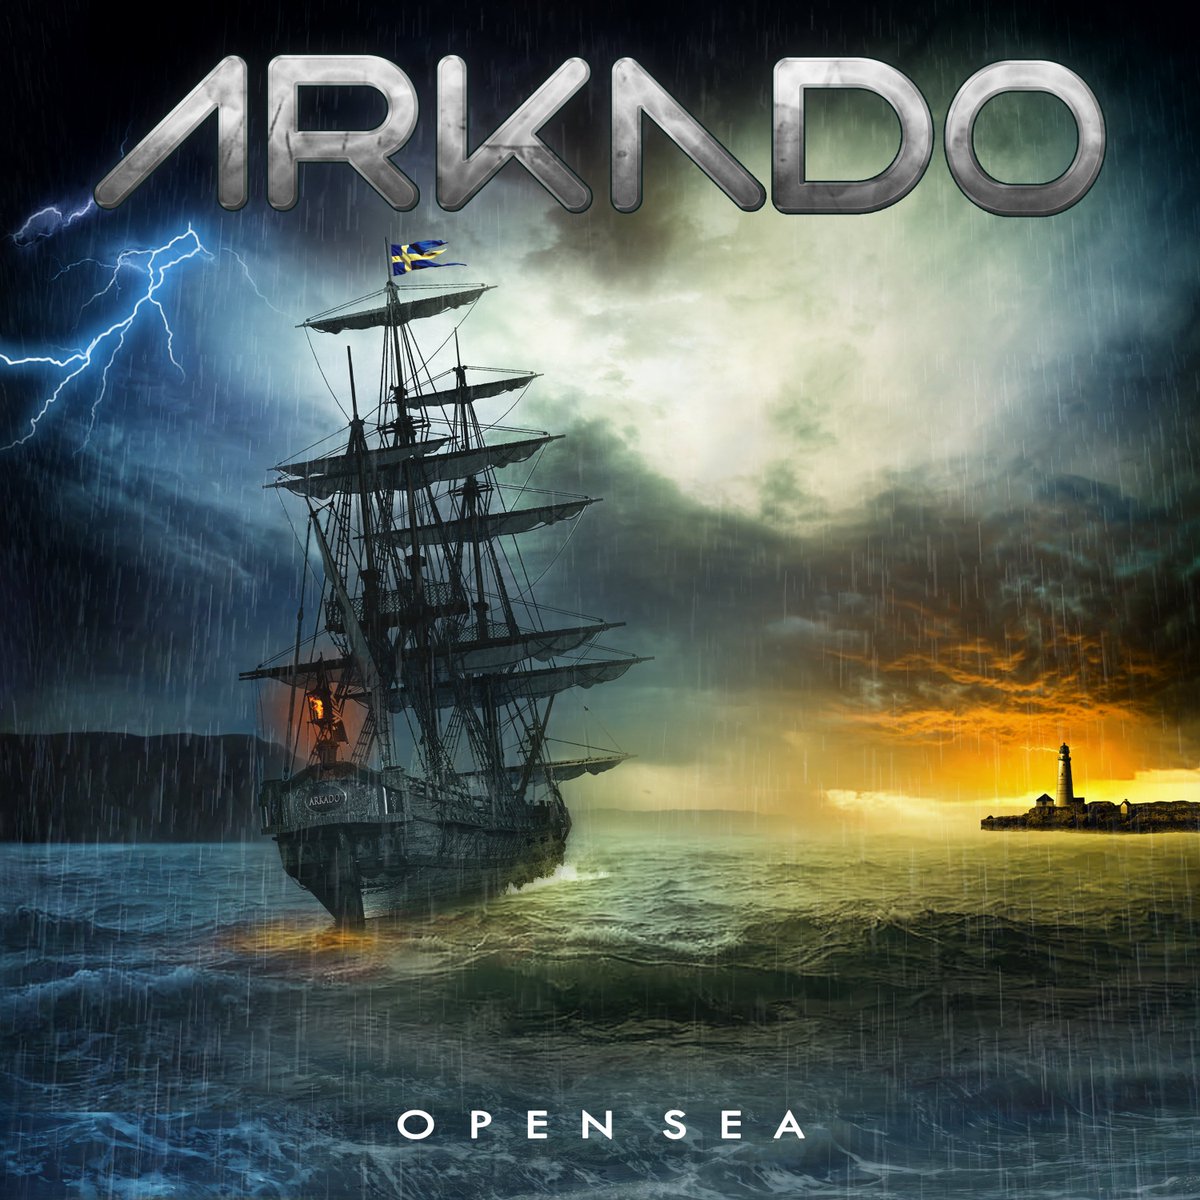 Open Sea by Arkado (Pride & Joy Music) review now at Highwire Daze Online! For fans of Journey, Toto, and symphonic rock! Read here: highwiredaze.com/2024/02/25/ark…